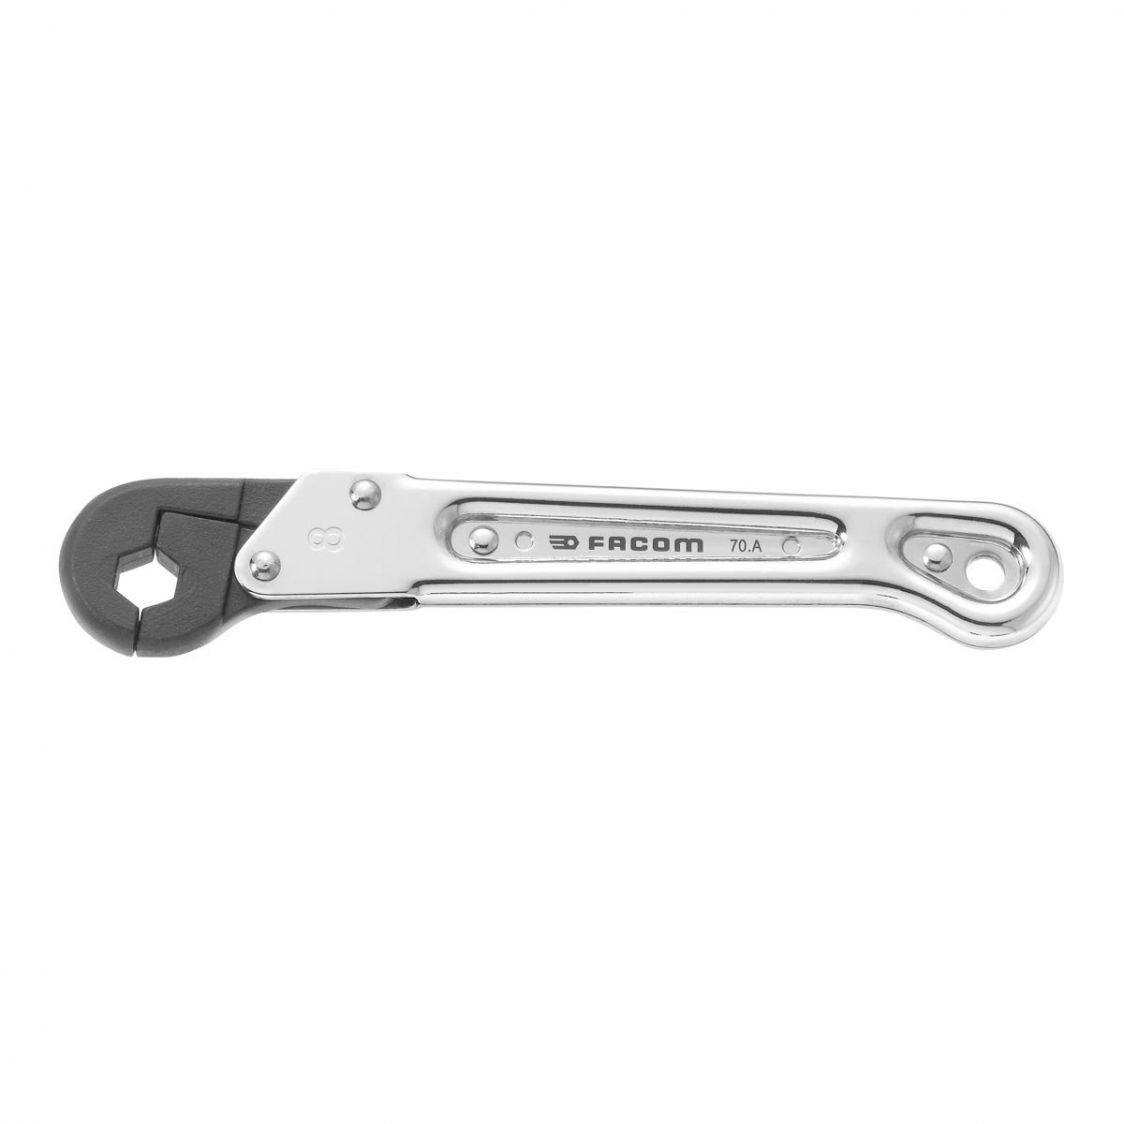 FACOM 70A.27 - 27mm Metric Ratchet Flare Nut Spanner